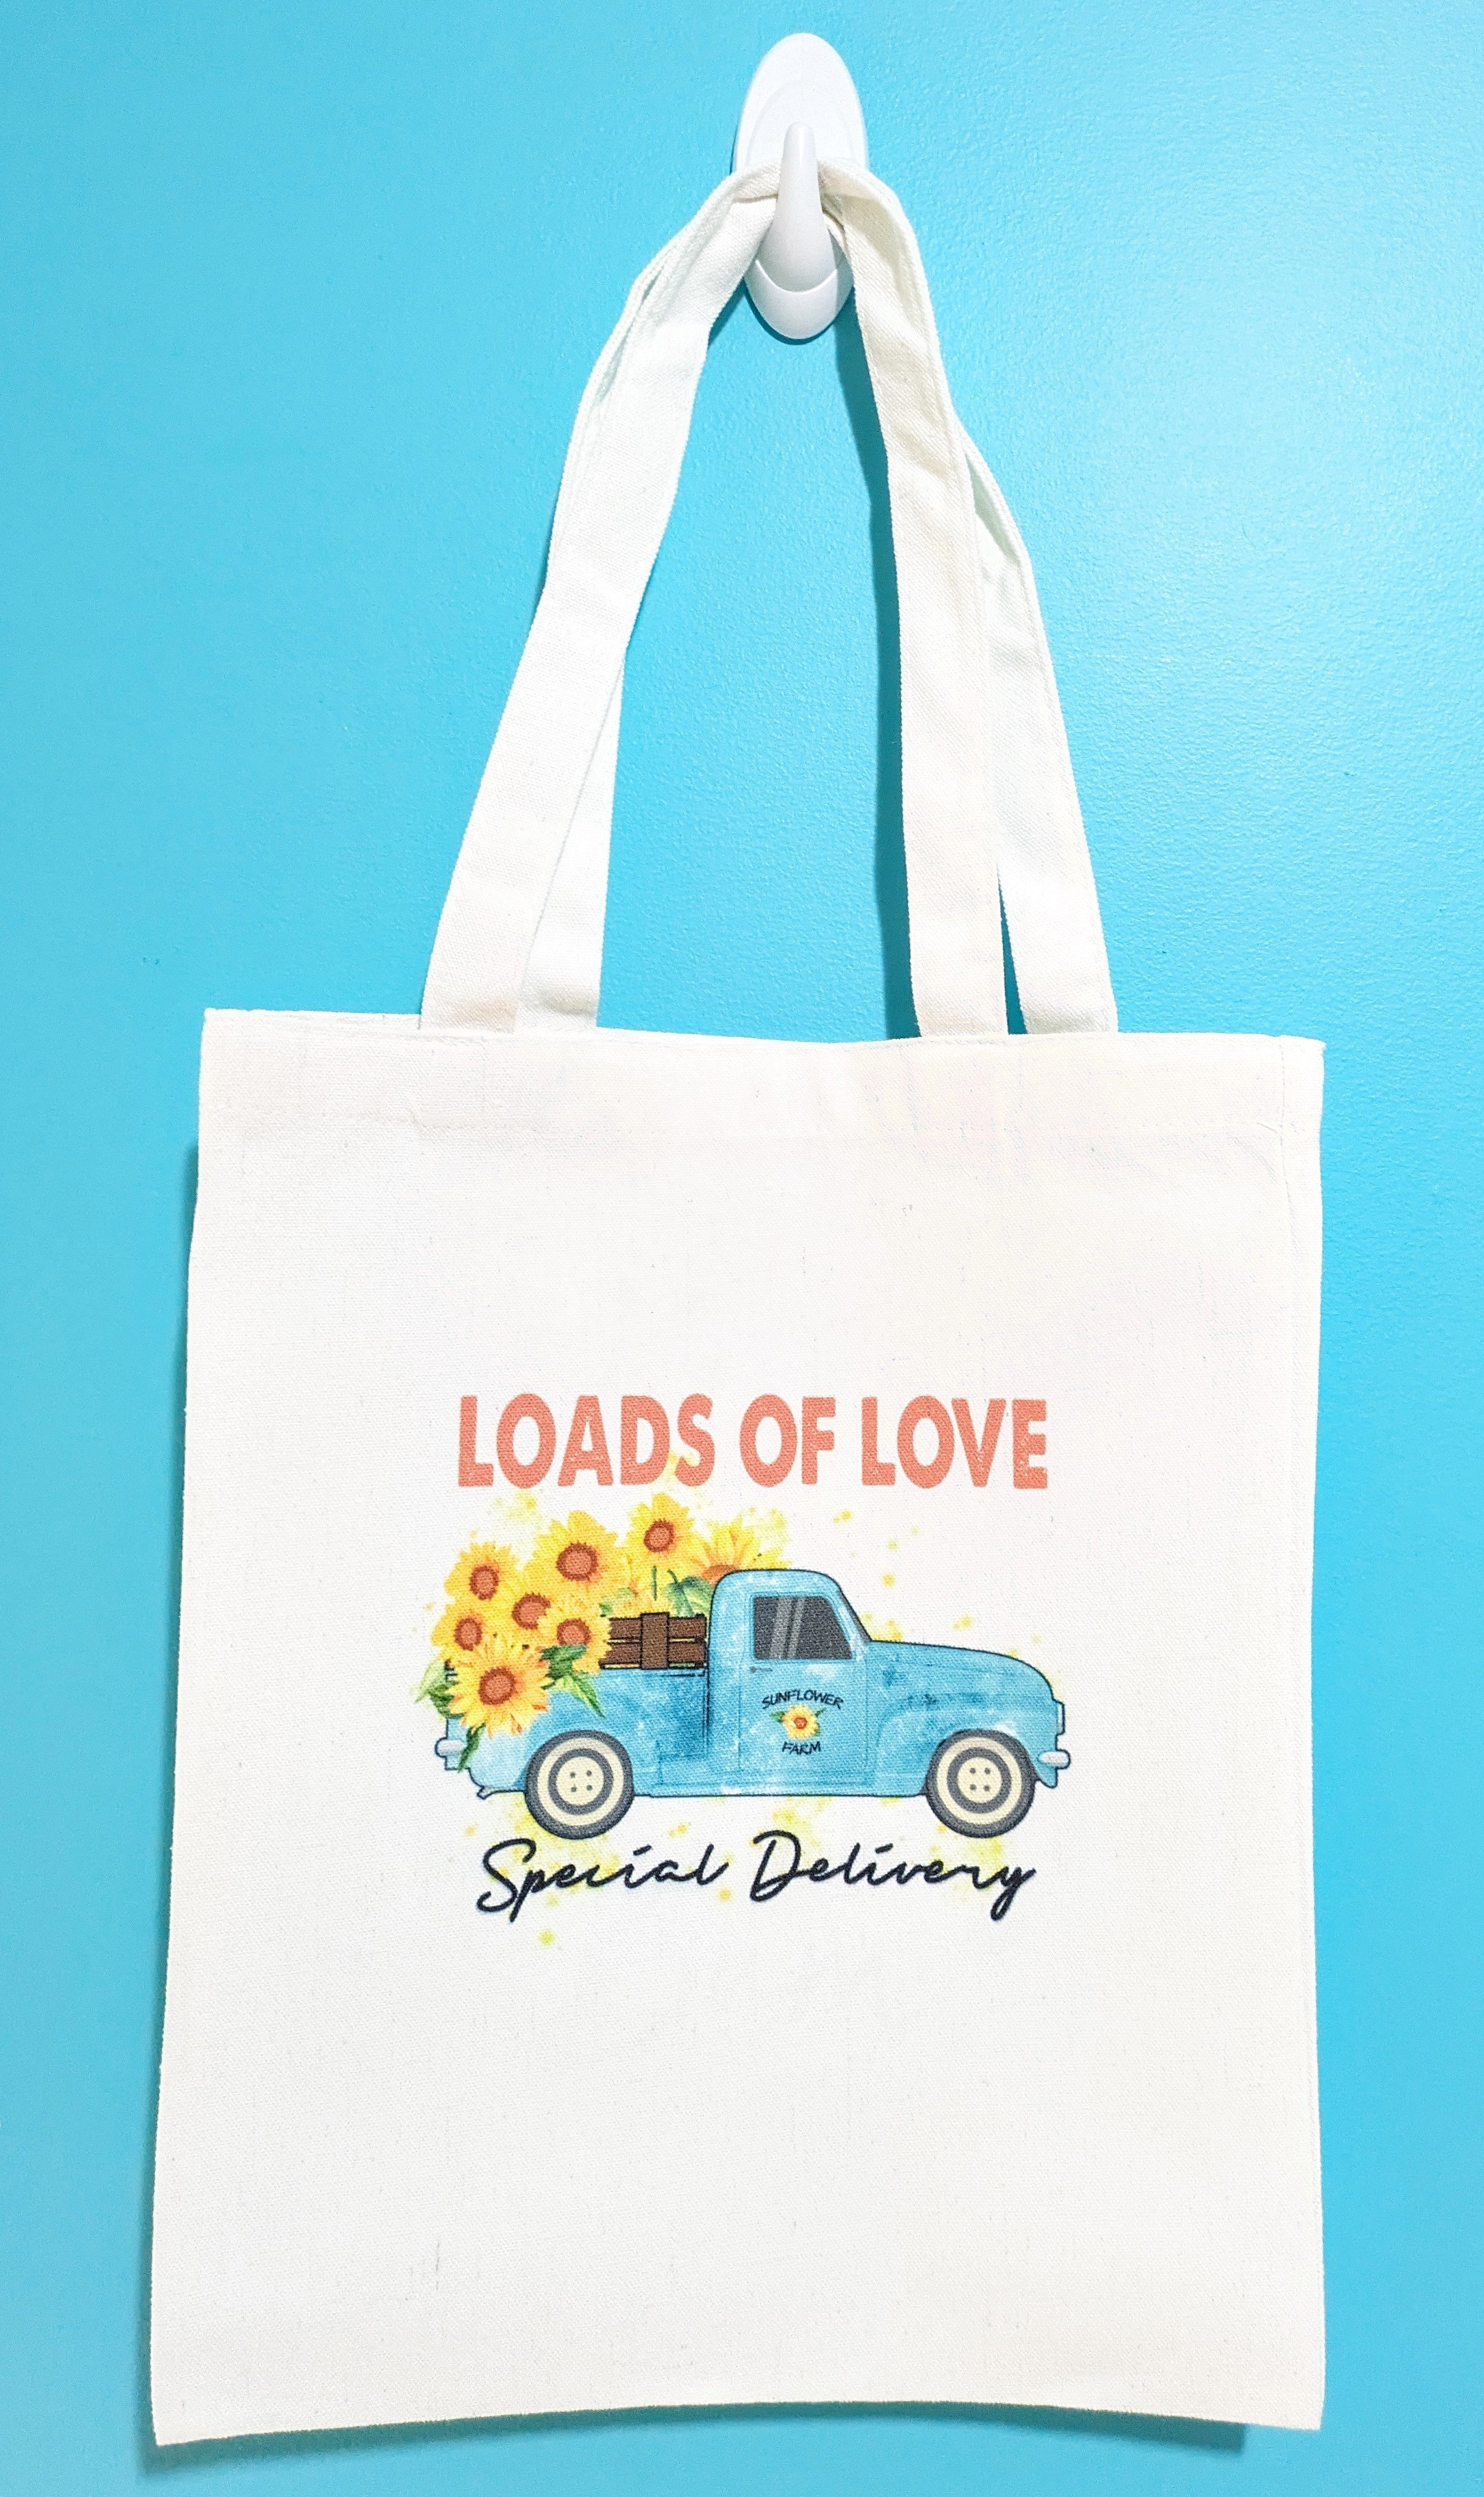 Tote Bag ~ Book Lover – Bliss Bath and Beyond